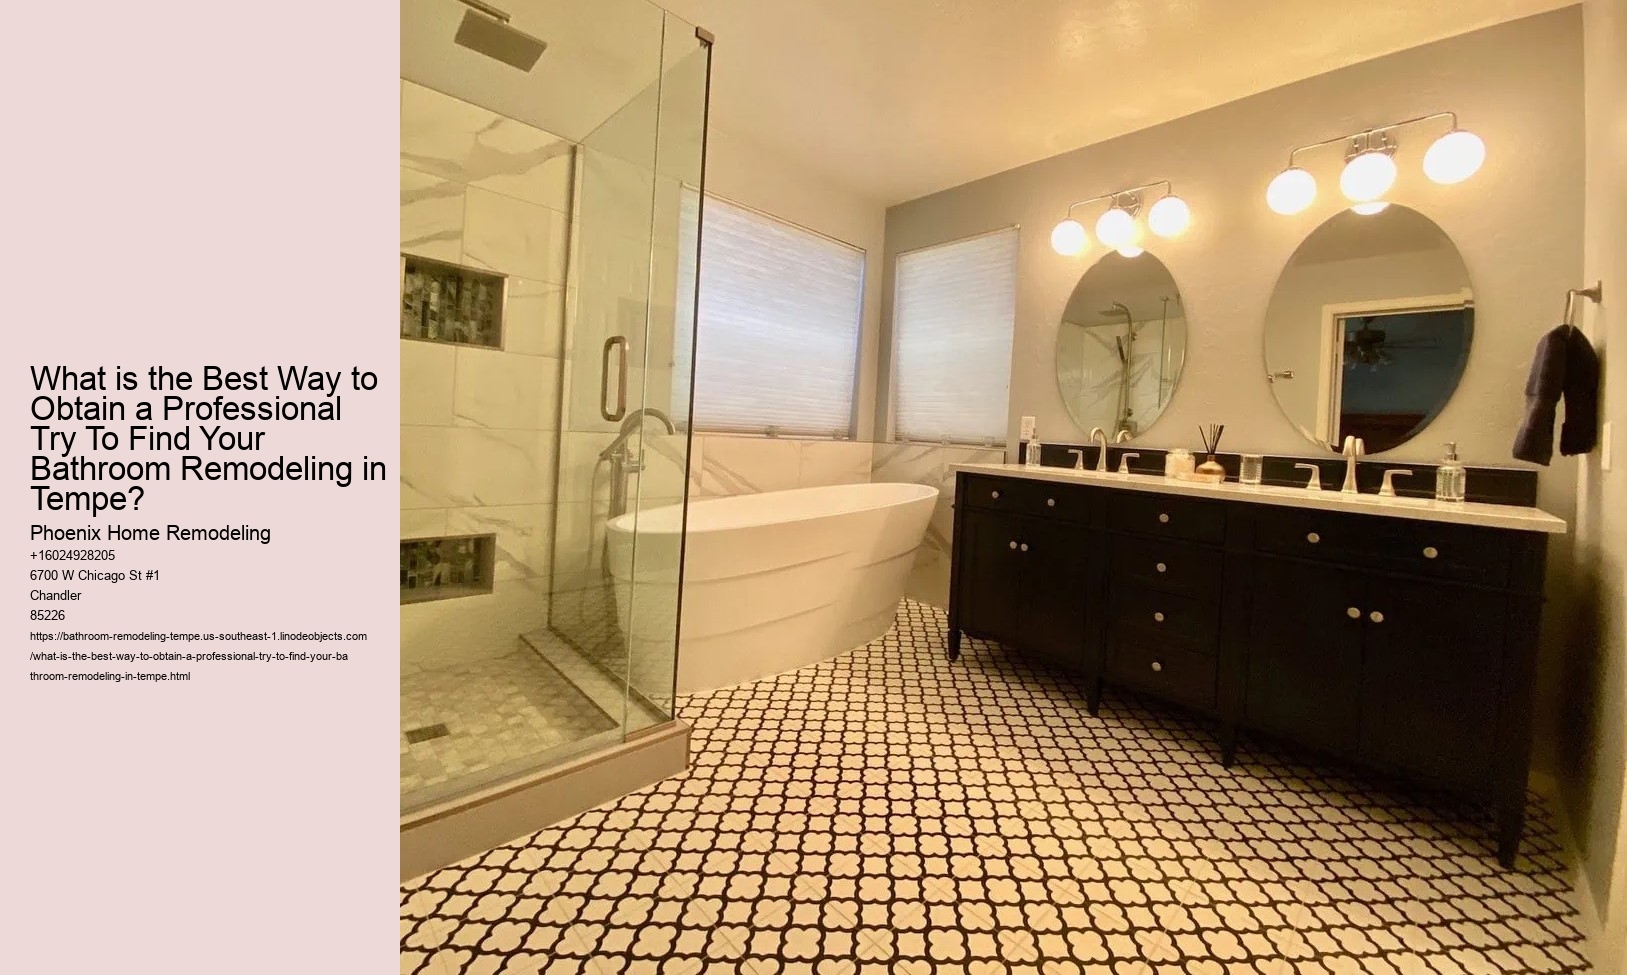 What is the Best Way to Obtain a Professional Try To Find Your Bathroom Remodeling in Tempe?